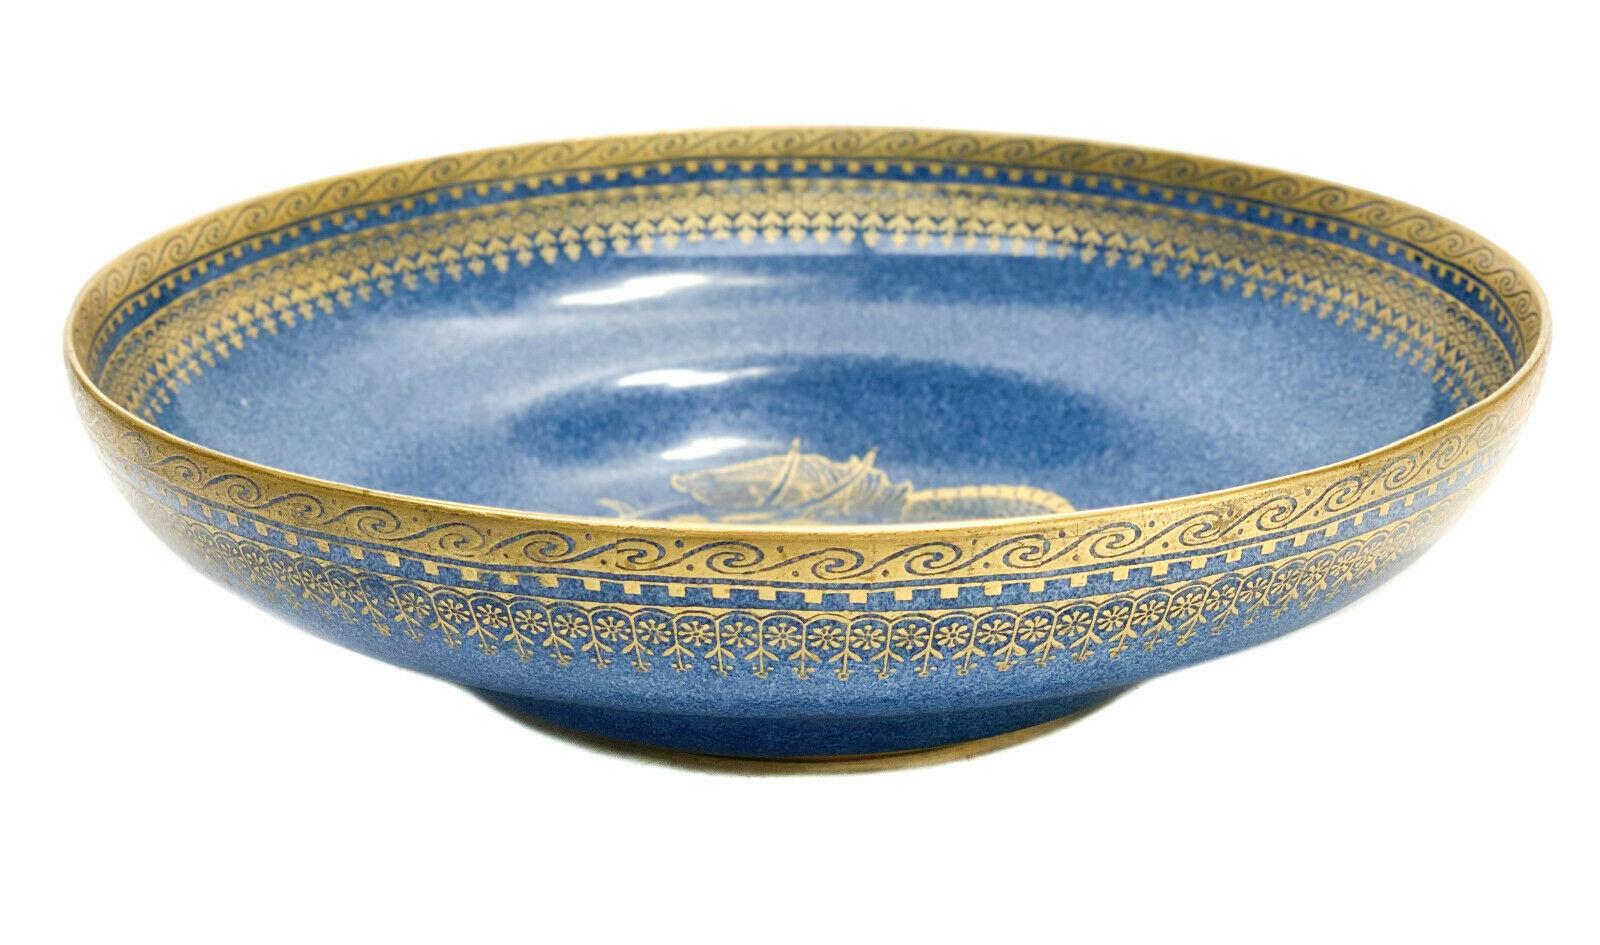 Royal Worcester England powered blue porcelain gilt dragon bowl, 1918.

A powered blue periwinkle ground with a figural gilt dragon to the center. Gilt waves and flowers around the rim. Royal Worcester England mark dated to 1918.

Additional